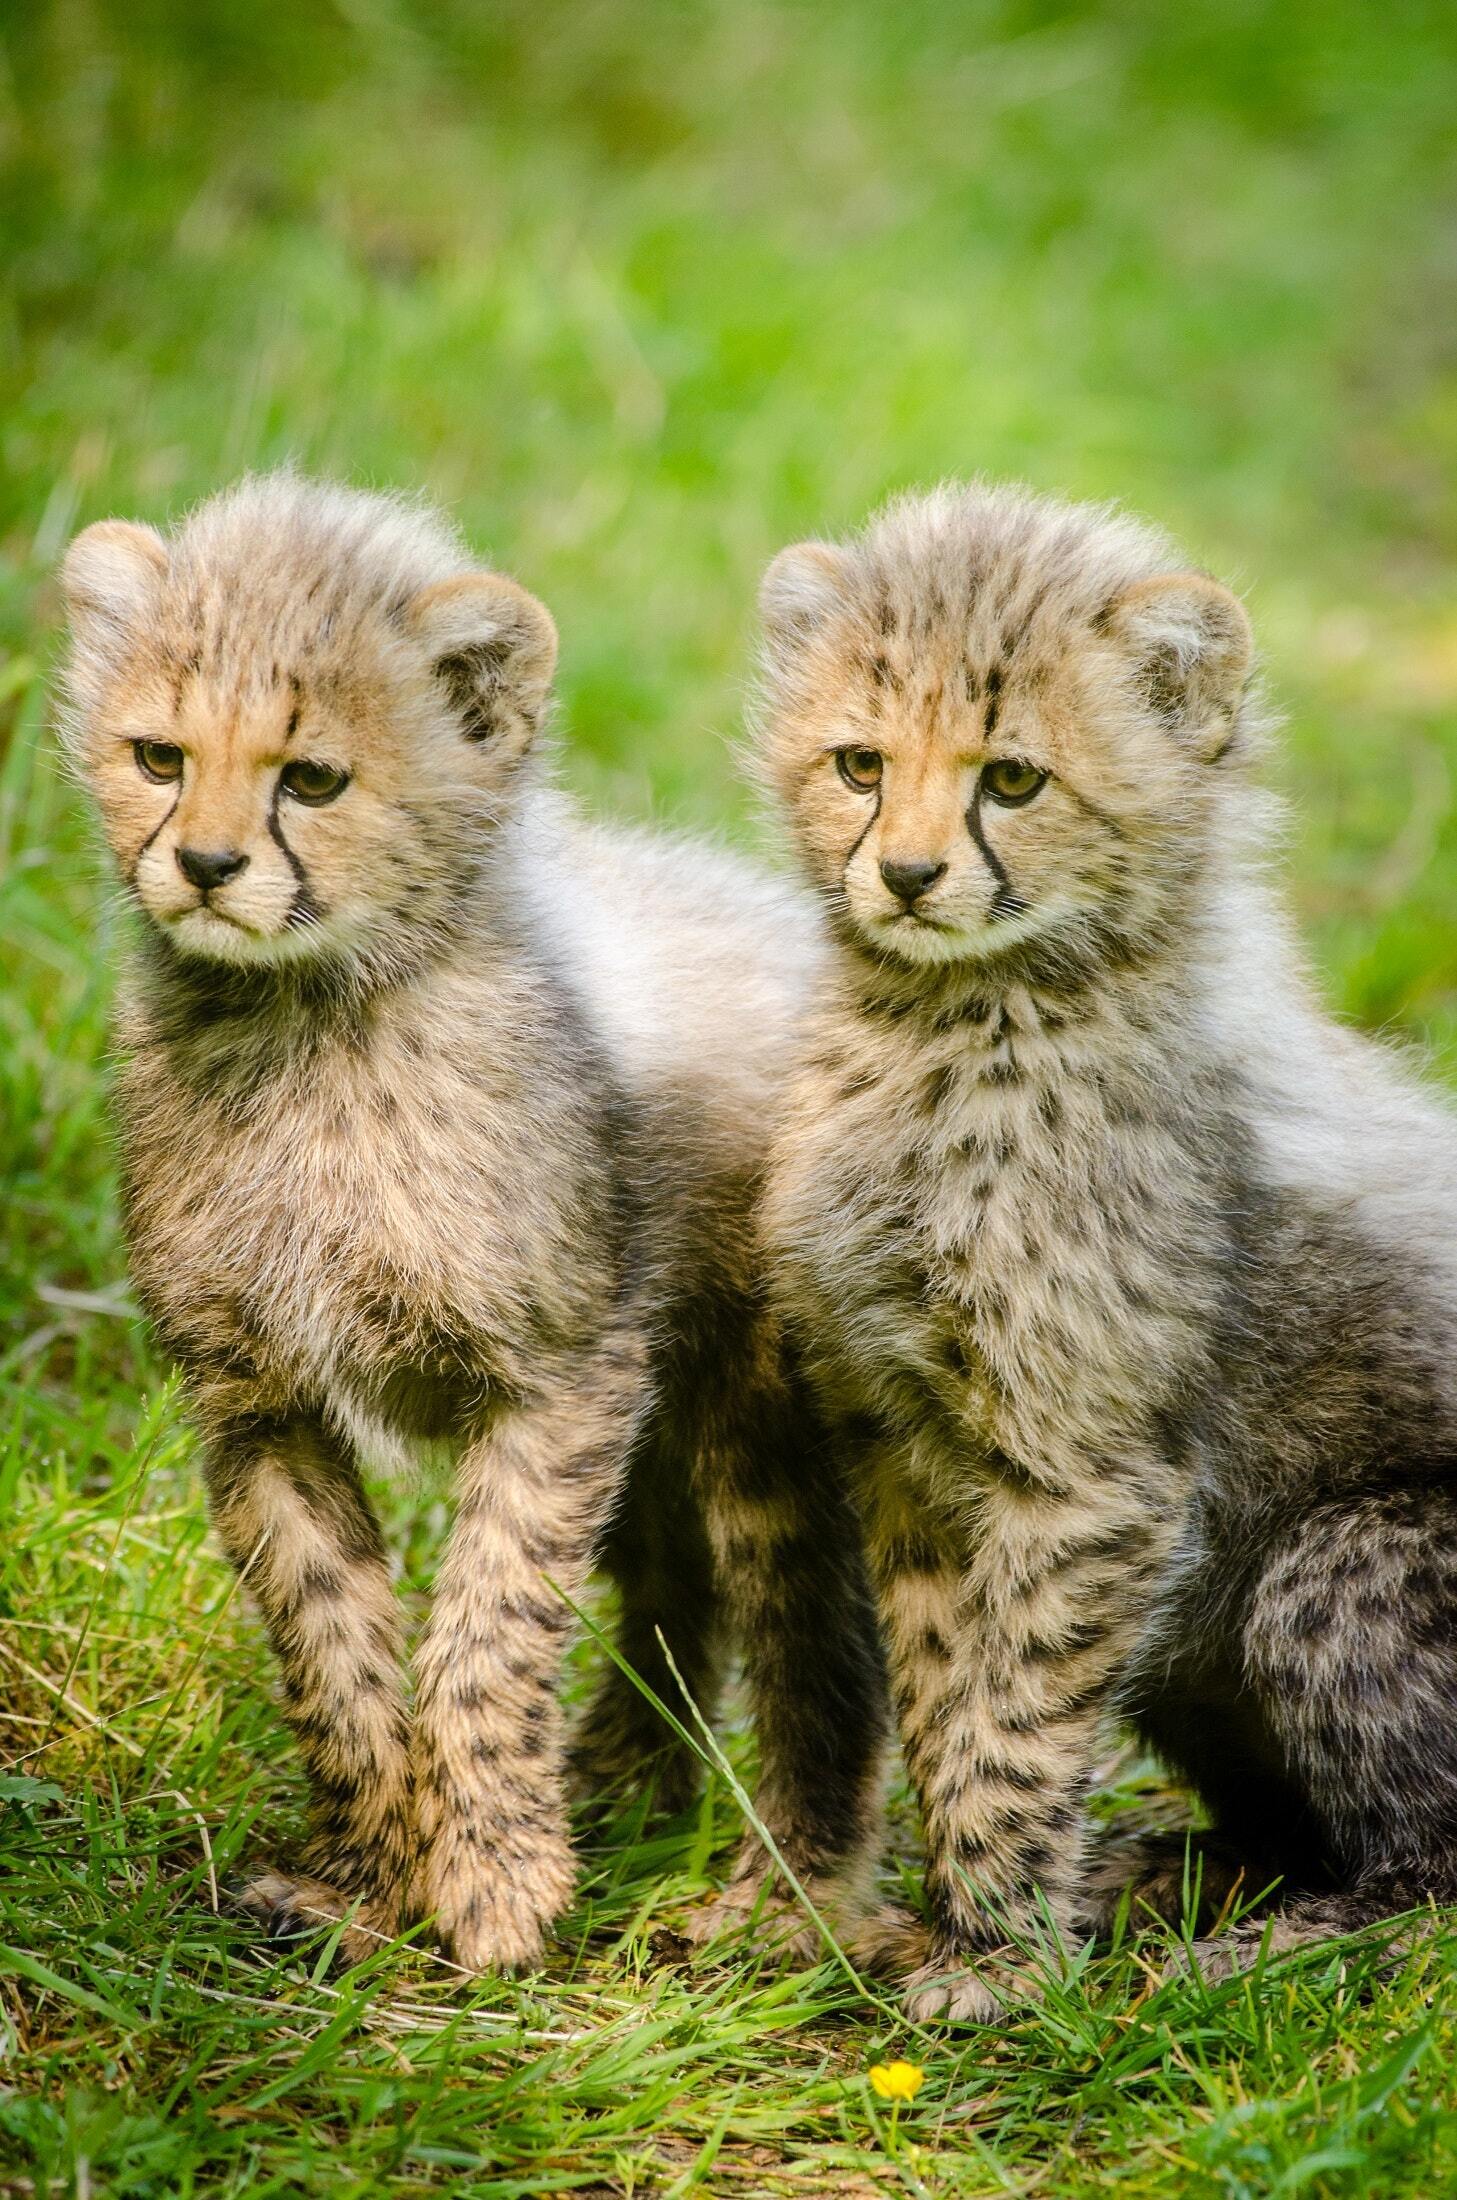 Cute Cheetah Cubs With Their Eyes Wide Open Background Cute Cheetah  Pictures Background Image And Wallpaper for Free Download